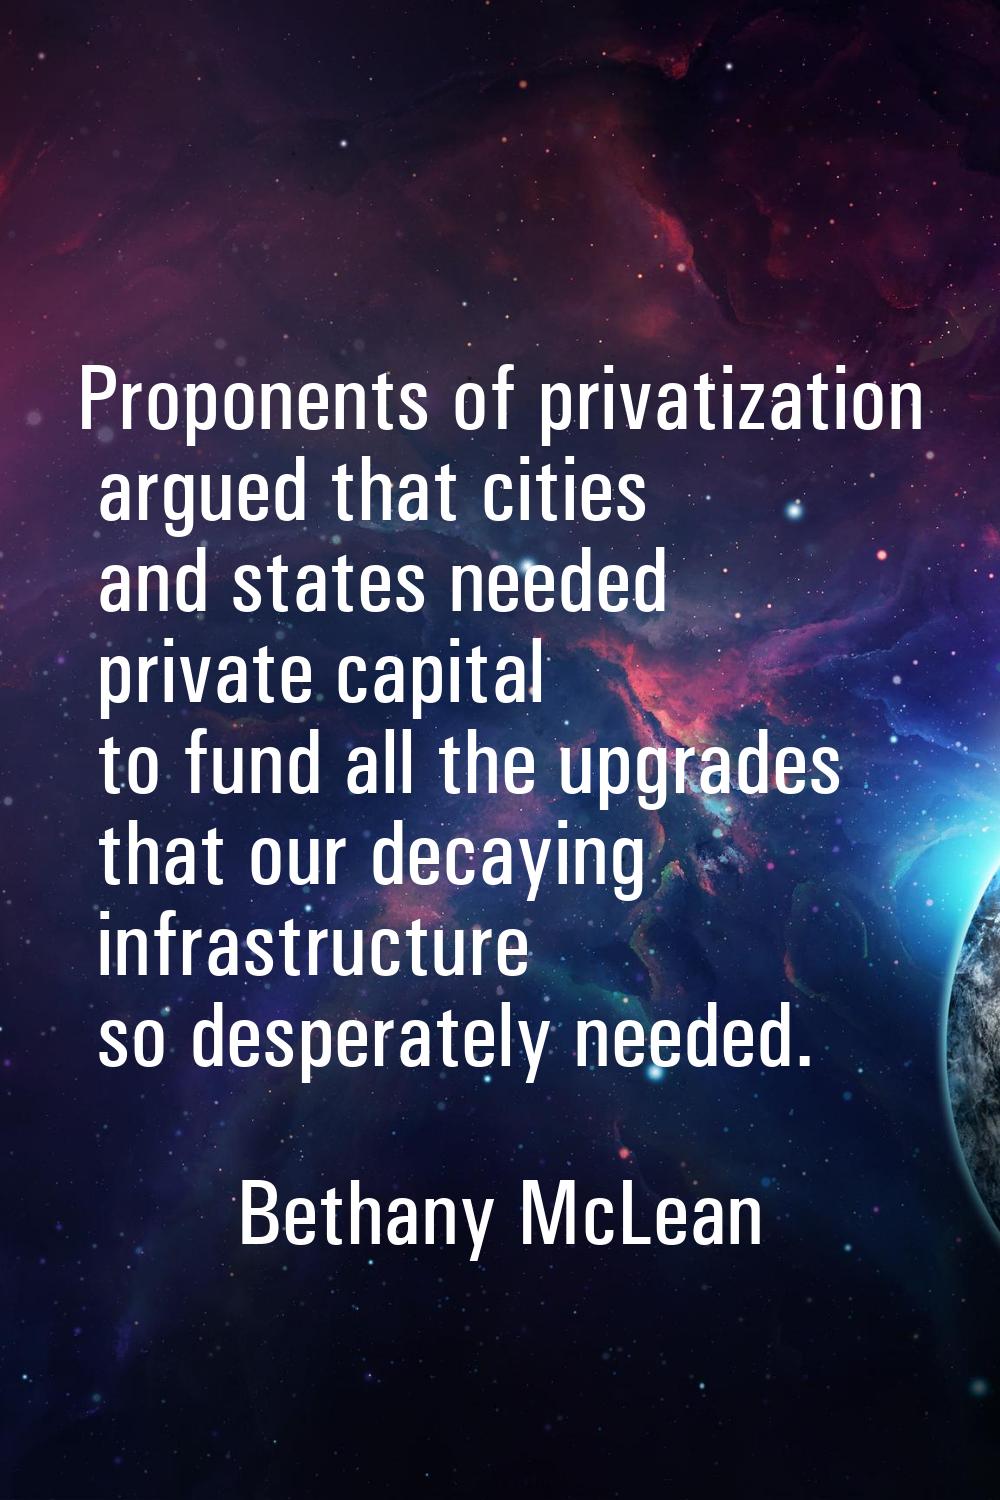 Proponents of privatization argued that cities and states needed private capital to fund all the up